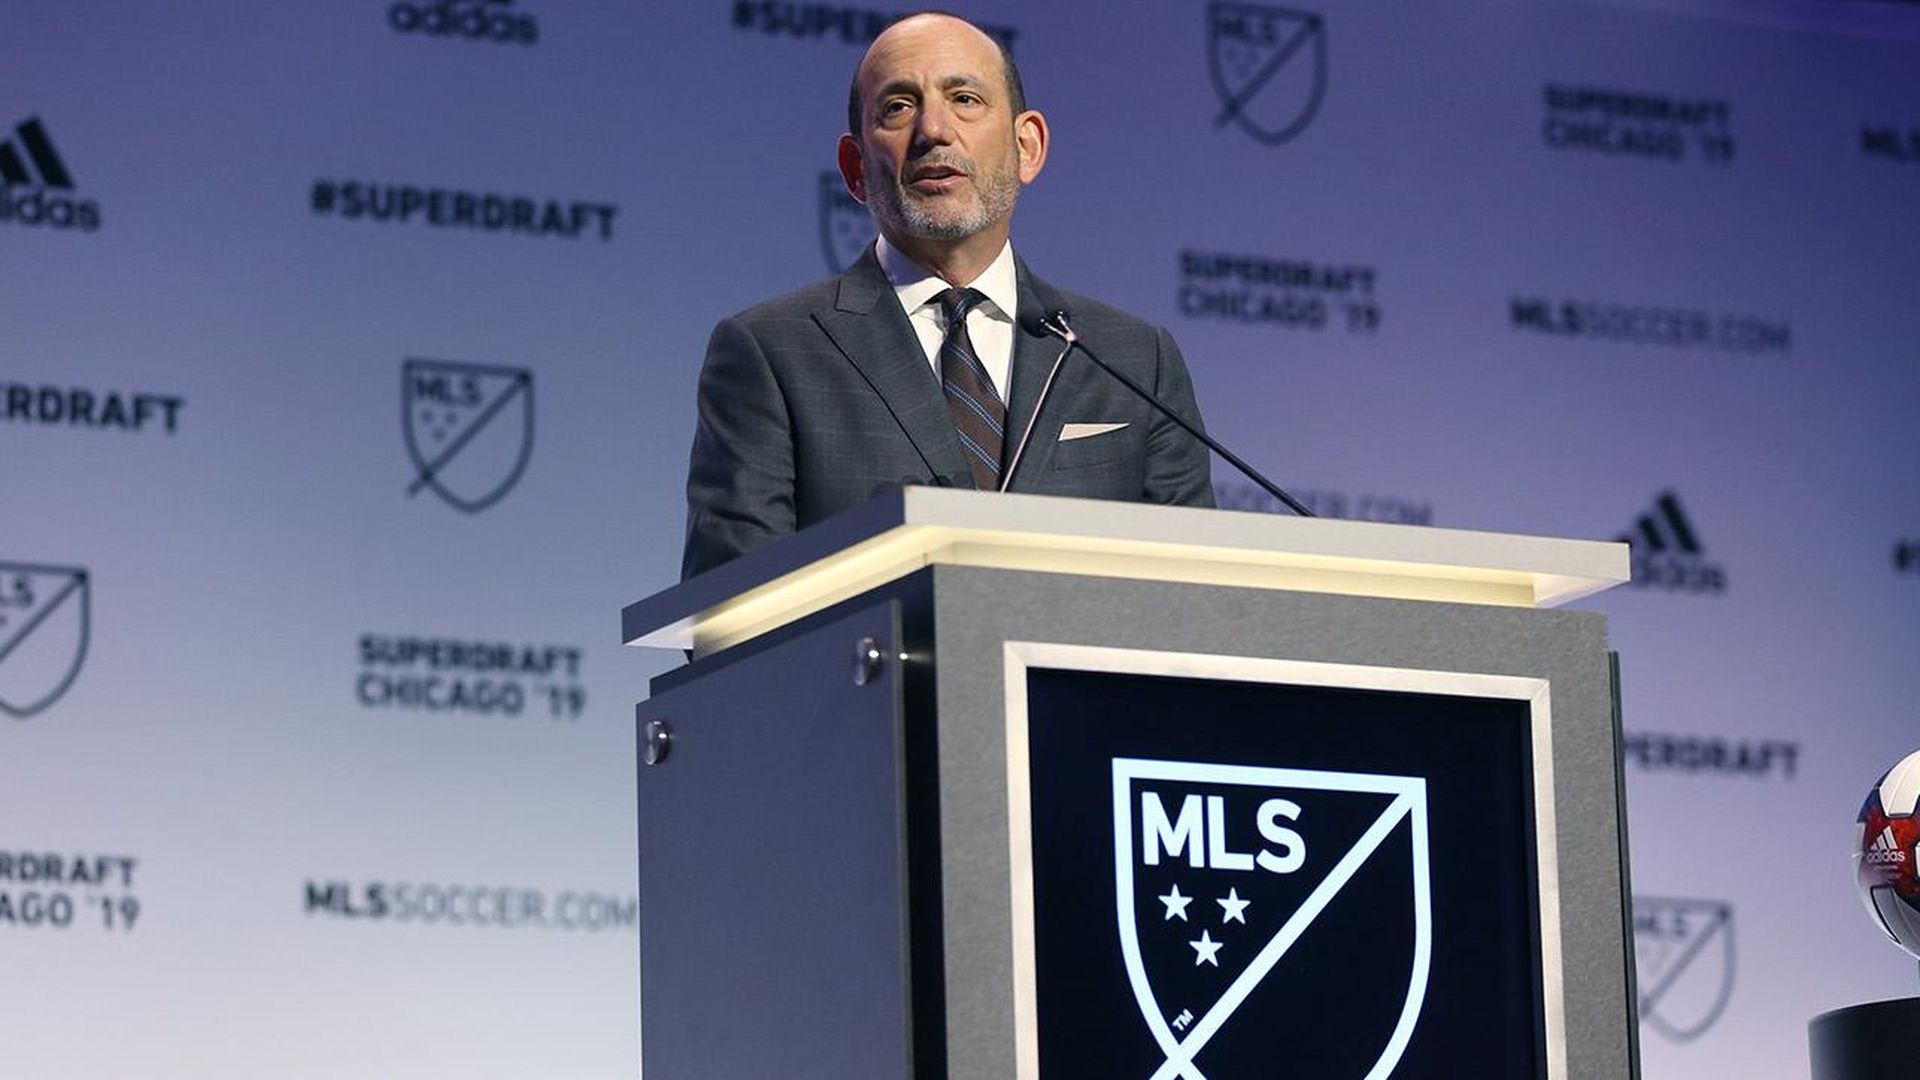 In this image, Don Garber stands in a suit and speaks from behind a podium. 